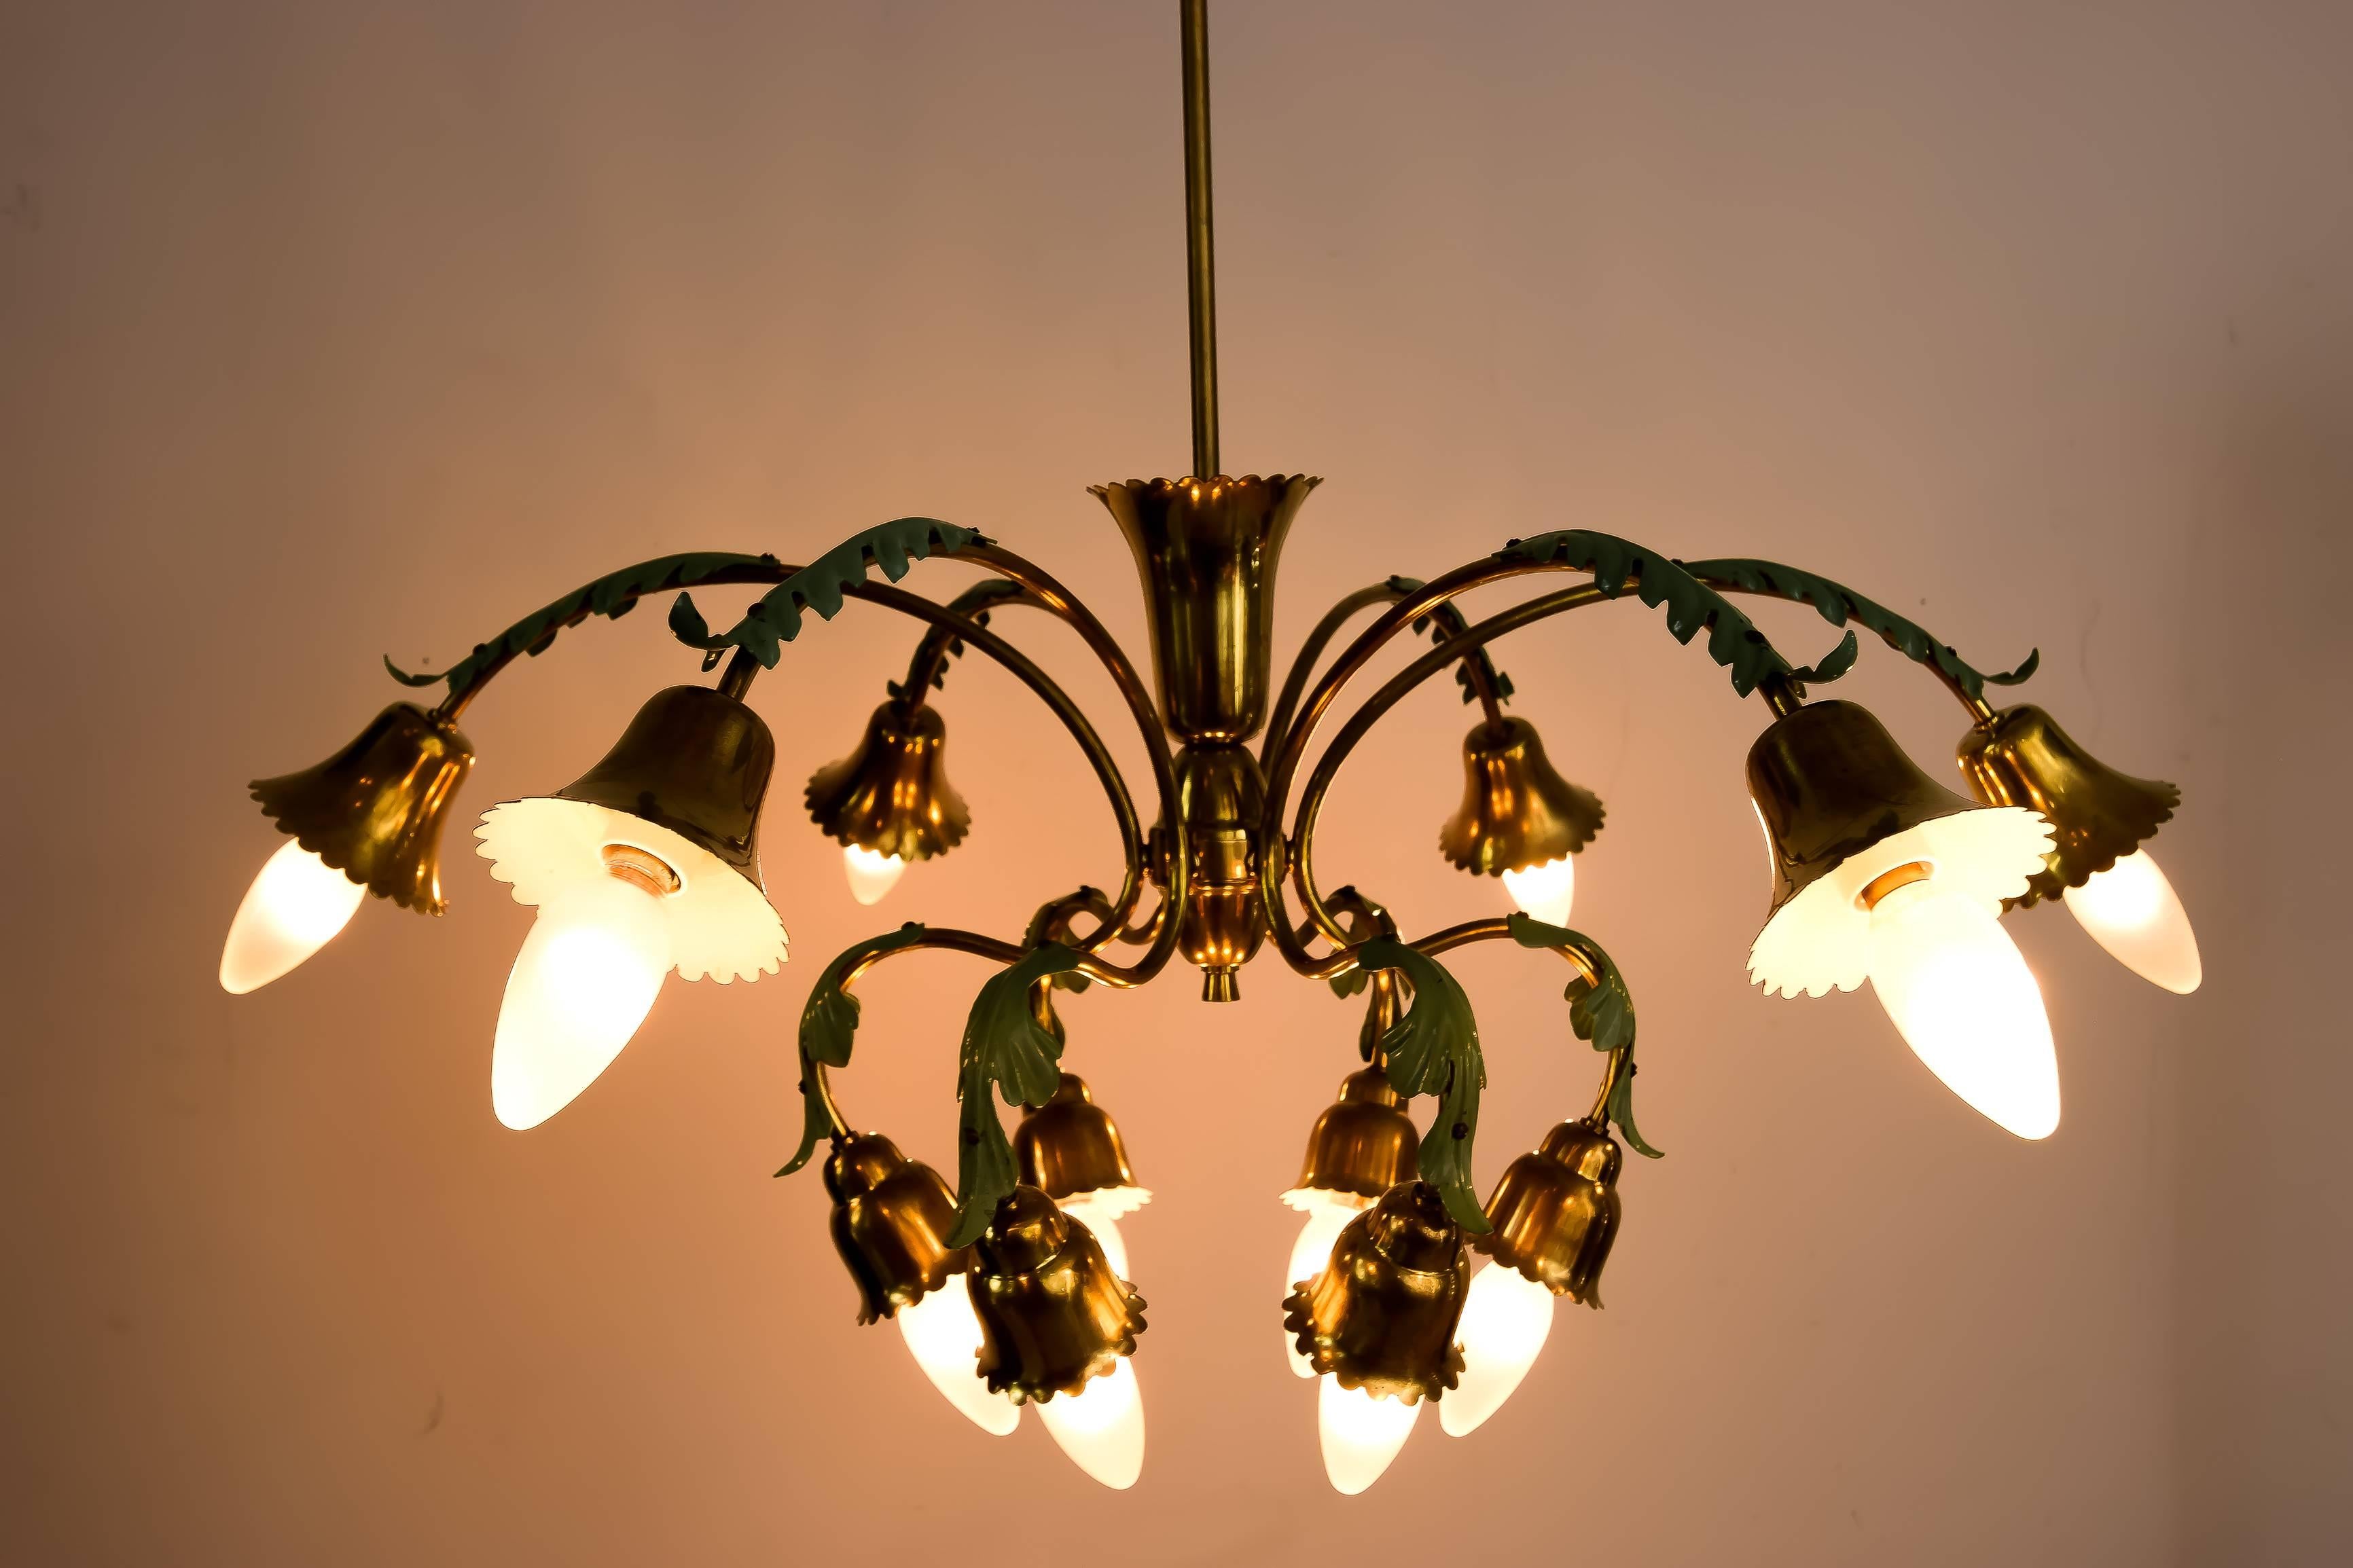 12-arm chandelier with green leaves Italien, circa 1960s
Partly painted
Original condition.